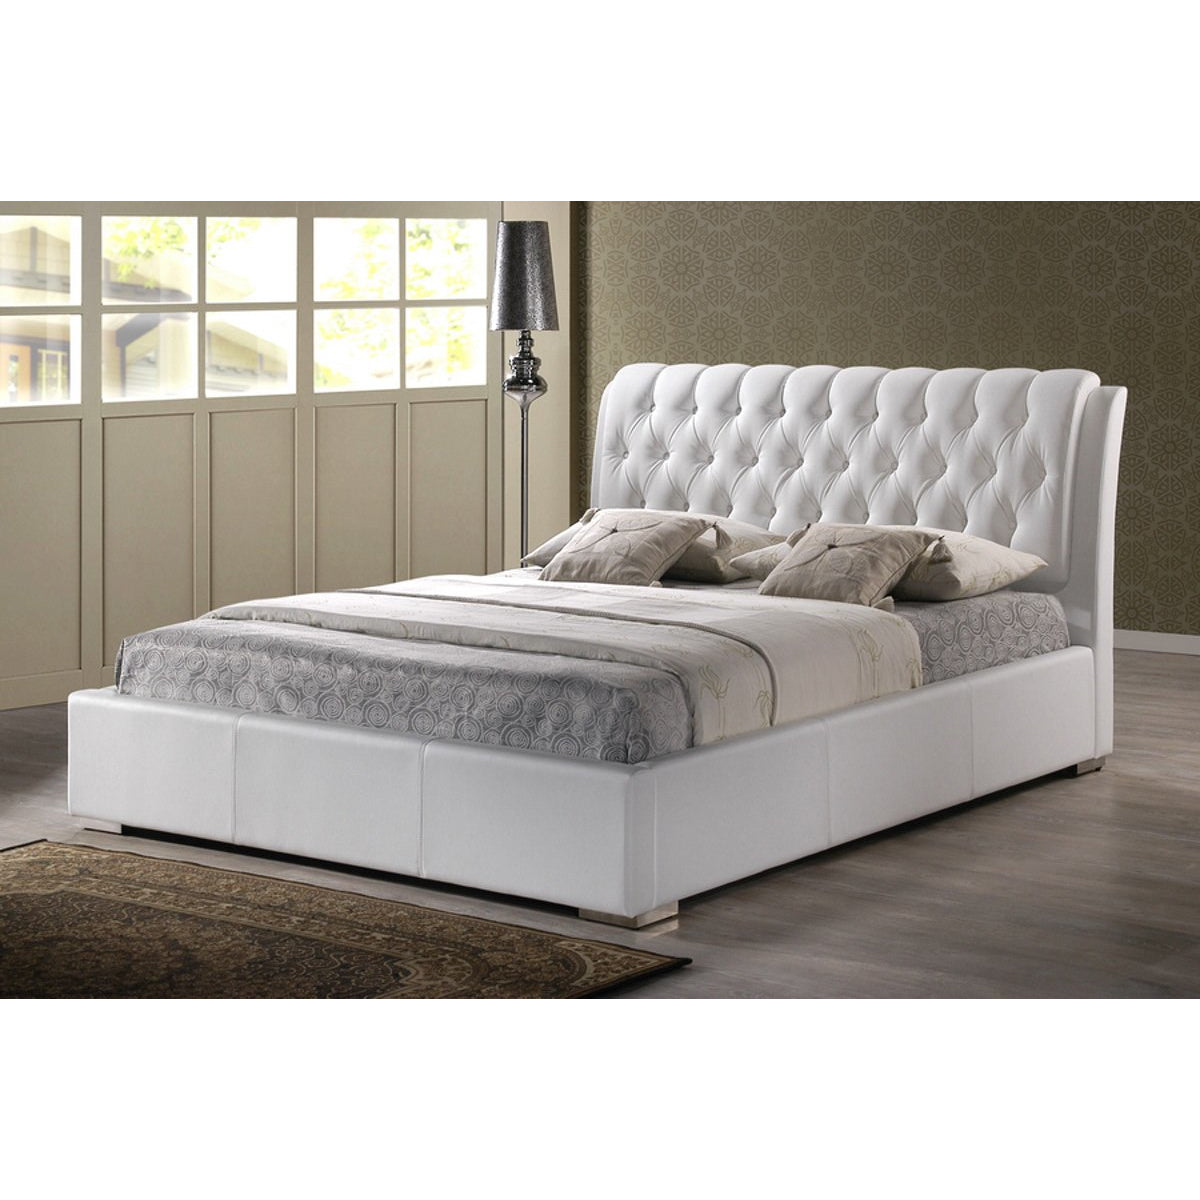 Baxton Studio Bianca White Modern Bed with Tufted Headboard (King Size) Baxton Studio-beds-Minimal And Modern - 1